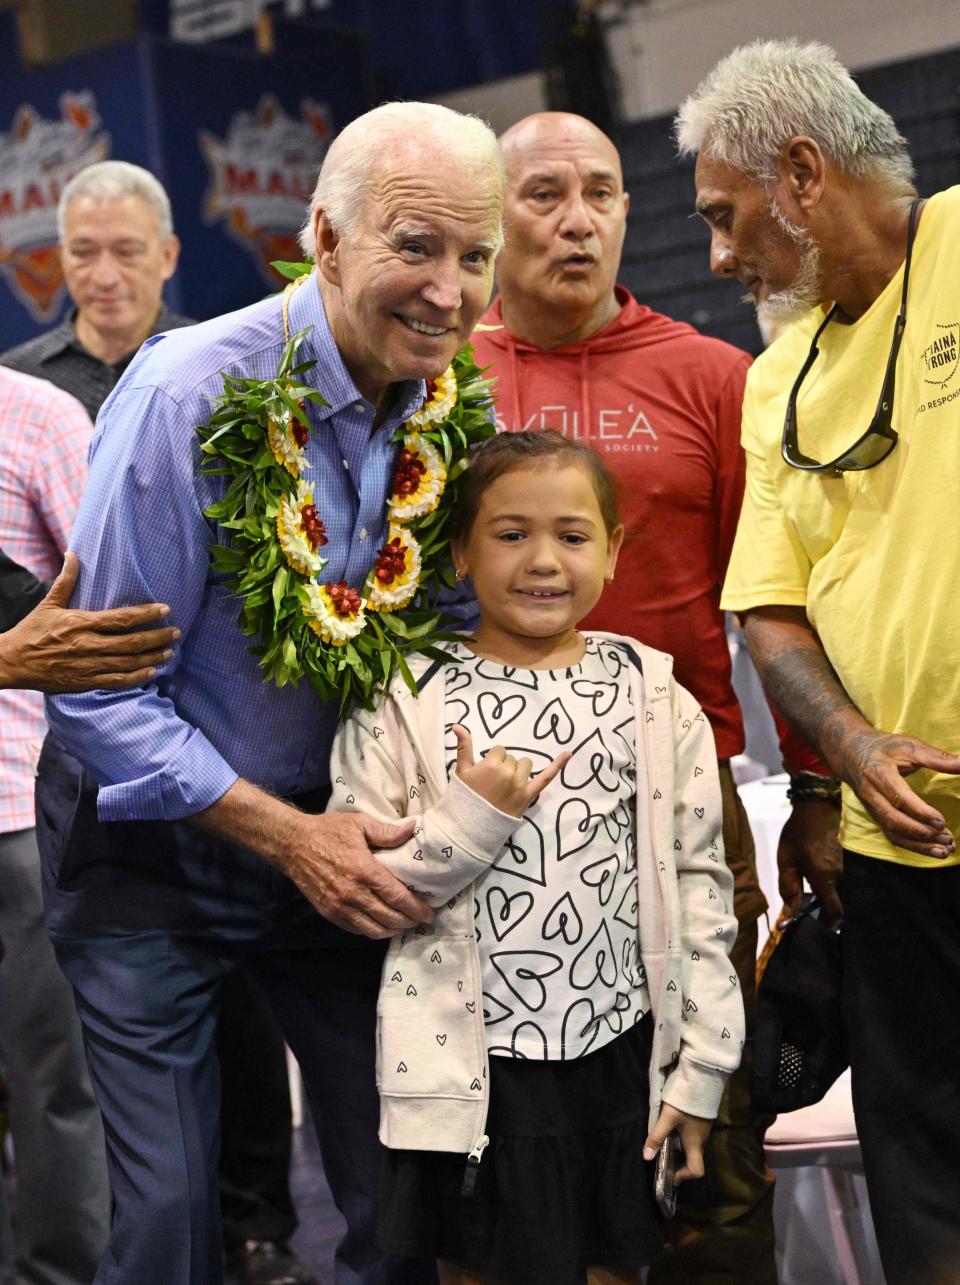 President Joe Biden poses for photos after speaking during a community engagement event at the Lahaina Civic Center in Lahaina, Hawaii on August 21, 2023.